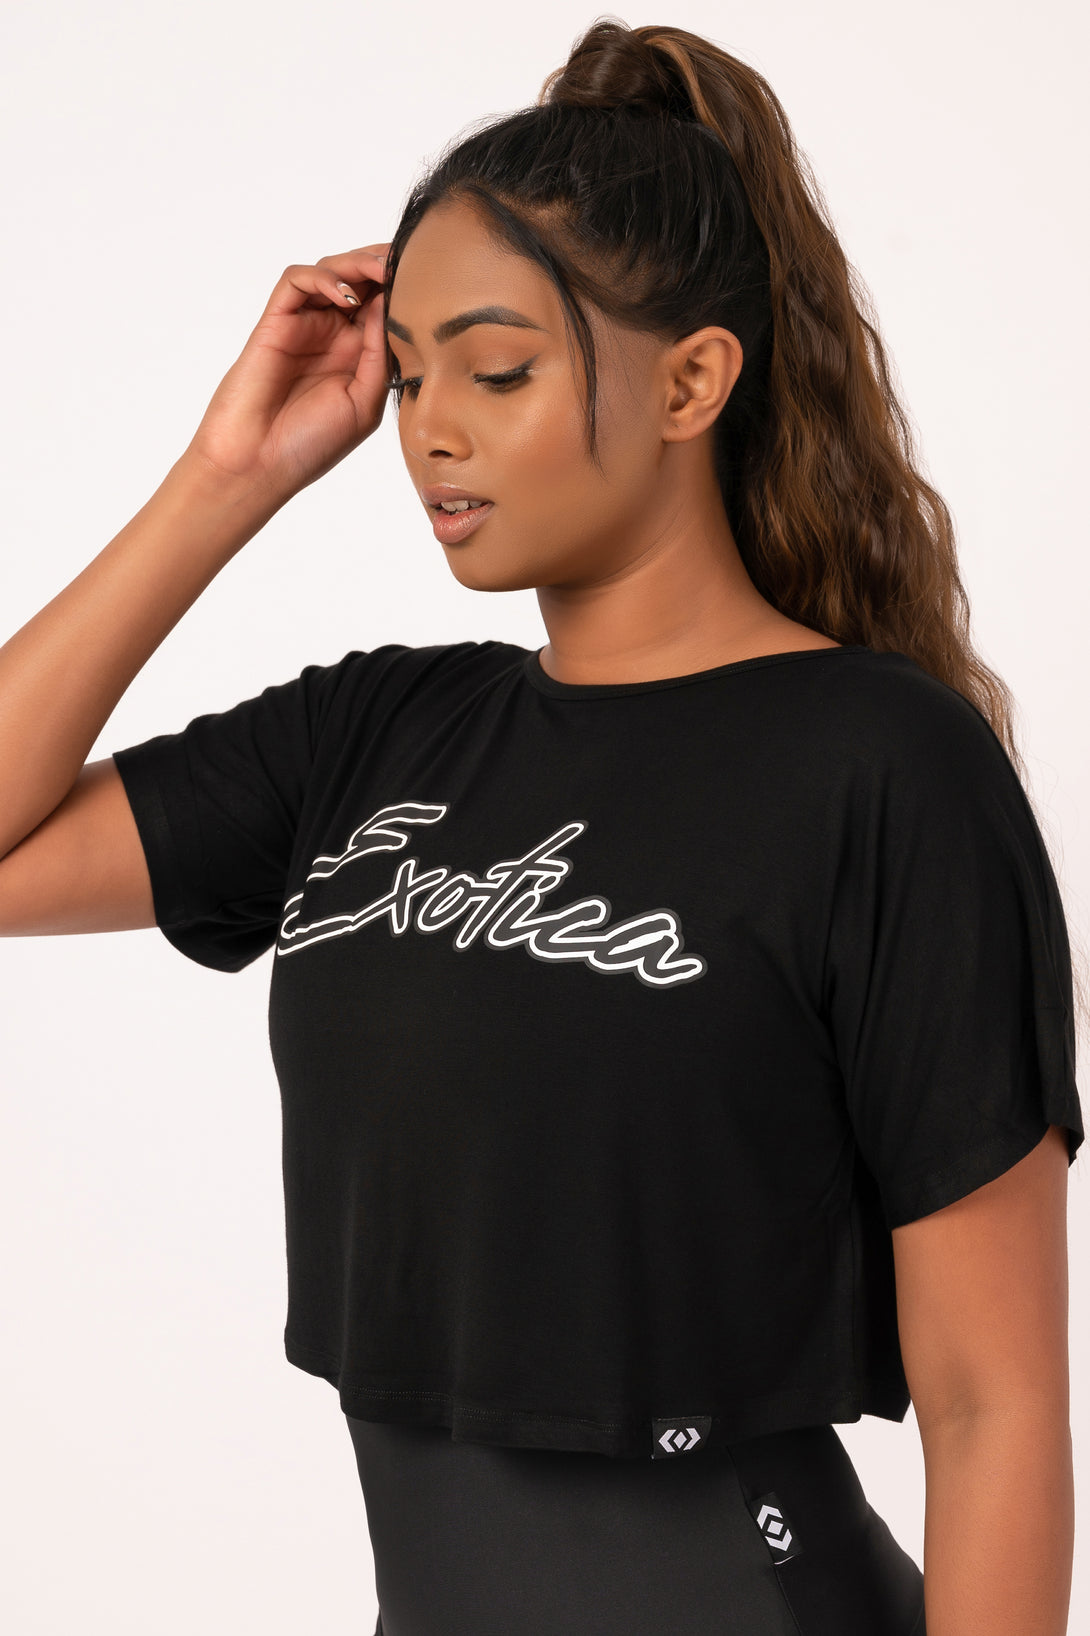 Black Slinky To Touch - Exotica Cropped Tee - Exoticathletica